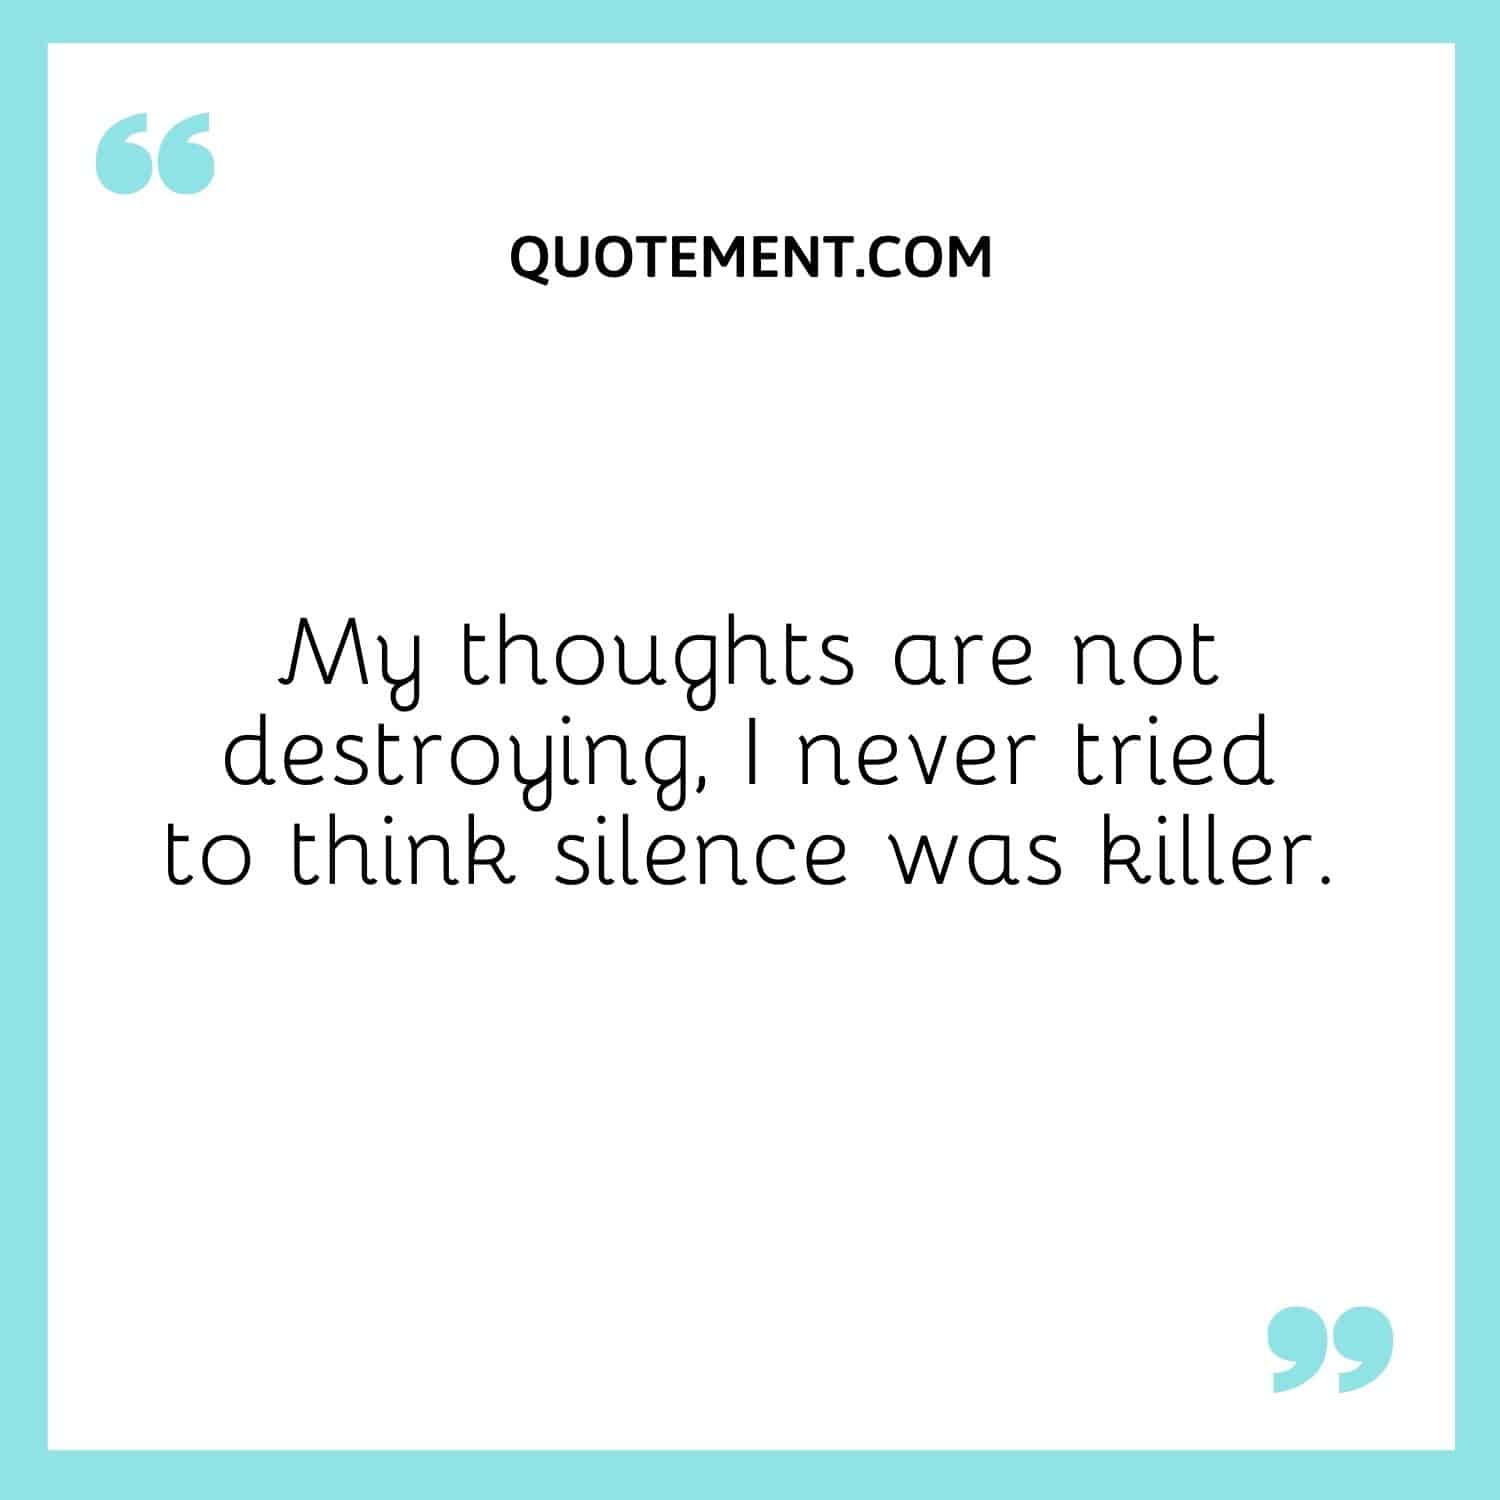 My thoughts are not destroying, I never tried to think silence was killer.